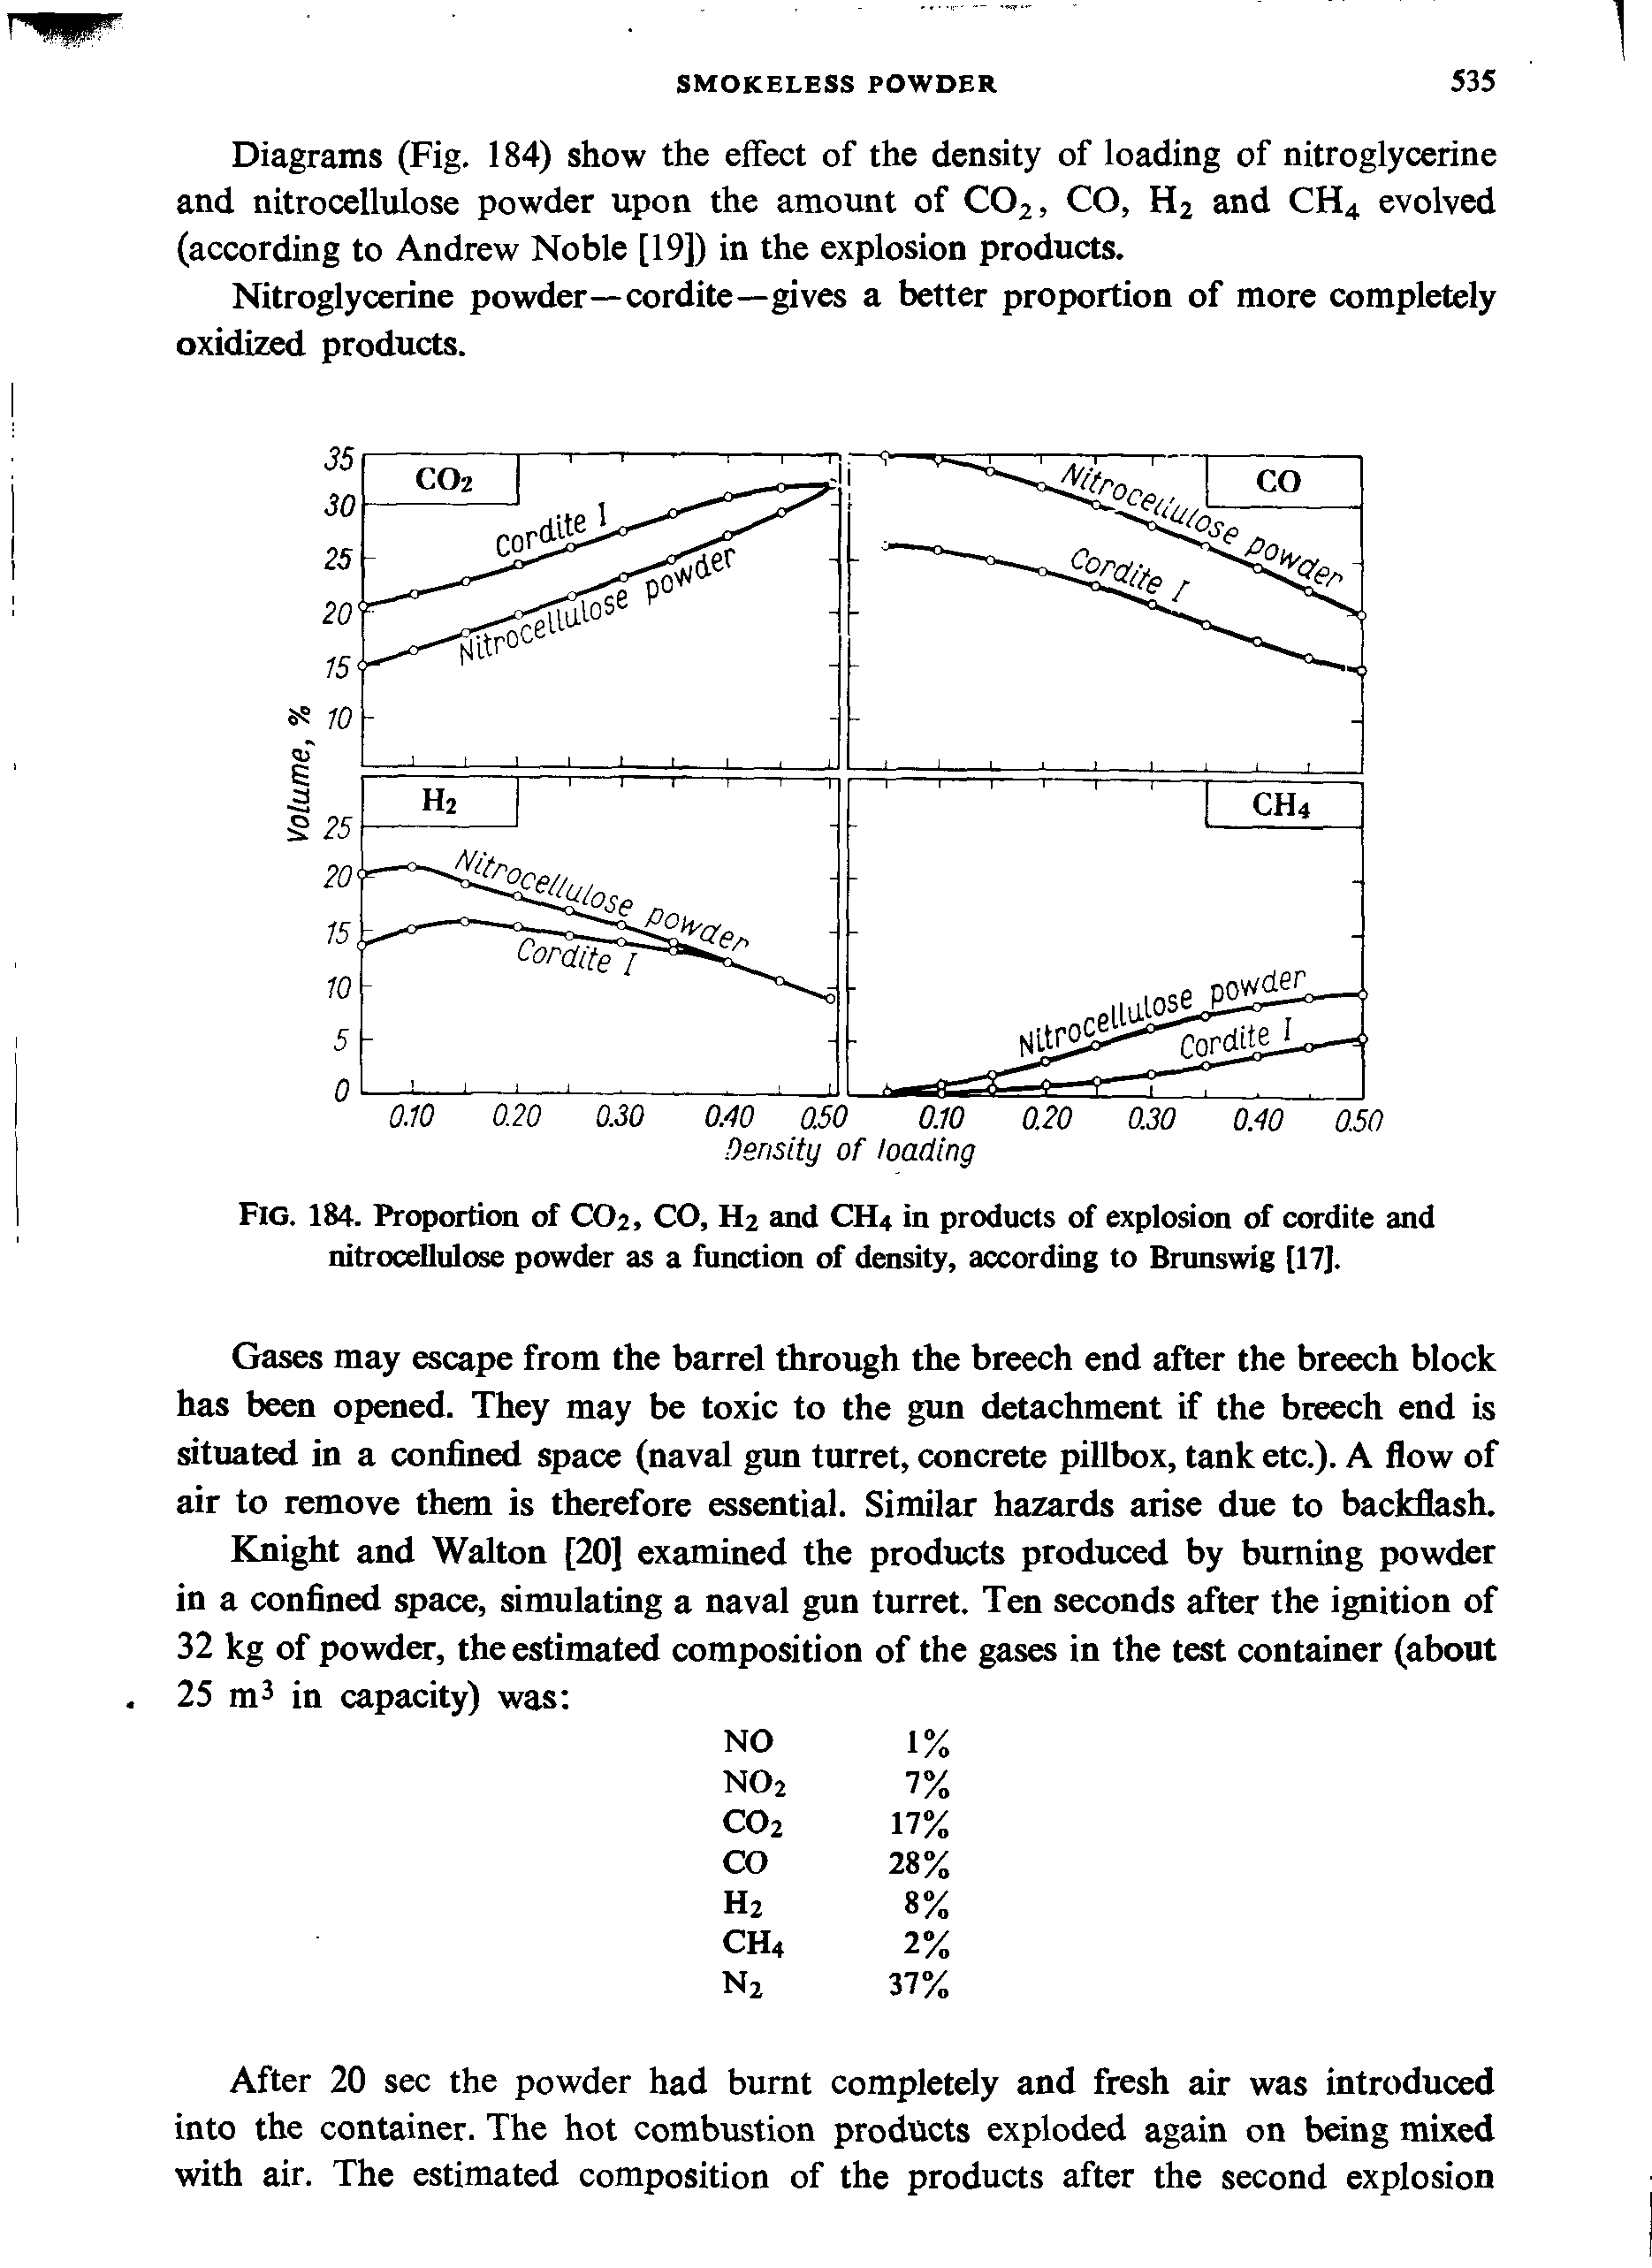 Fig. 184. Proportion of C02, CO, H2 and CH4 in products of explosion of cordite and nitrocellulose powder as a function of density, according to Brunswig [17].